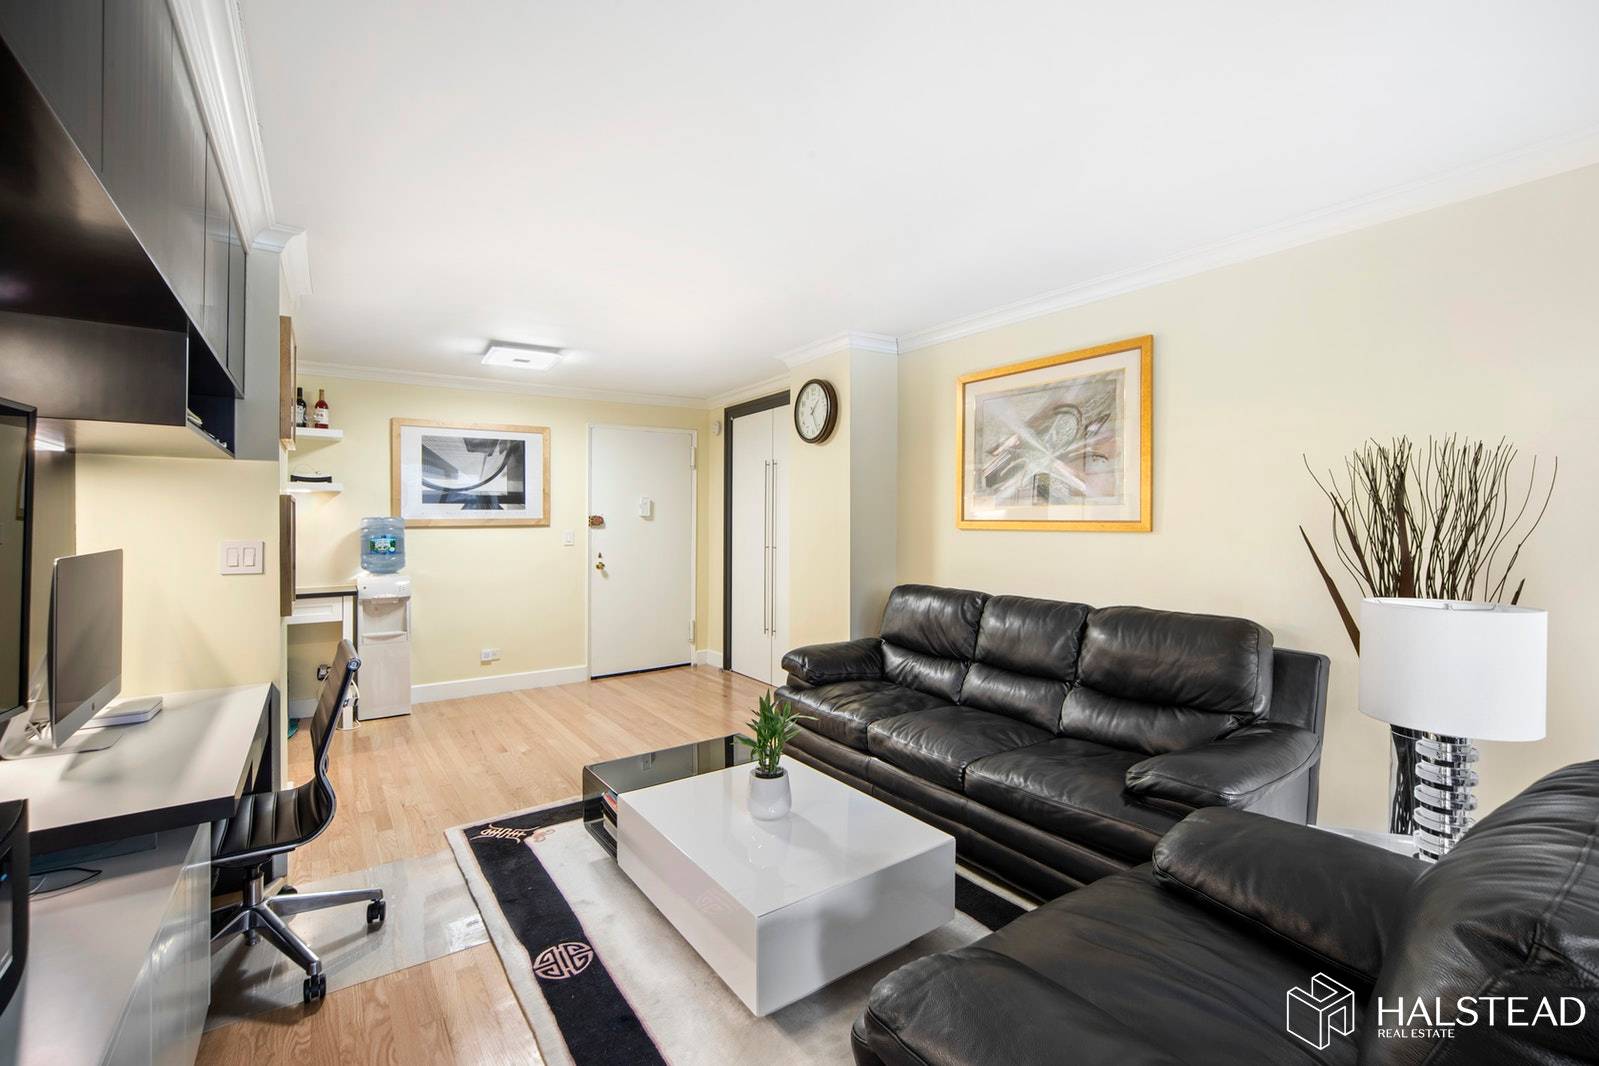 And move right in to this meticulously renovated junior one bedroom studio alcove in a most favorable cooperative.